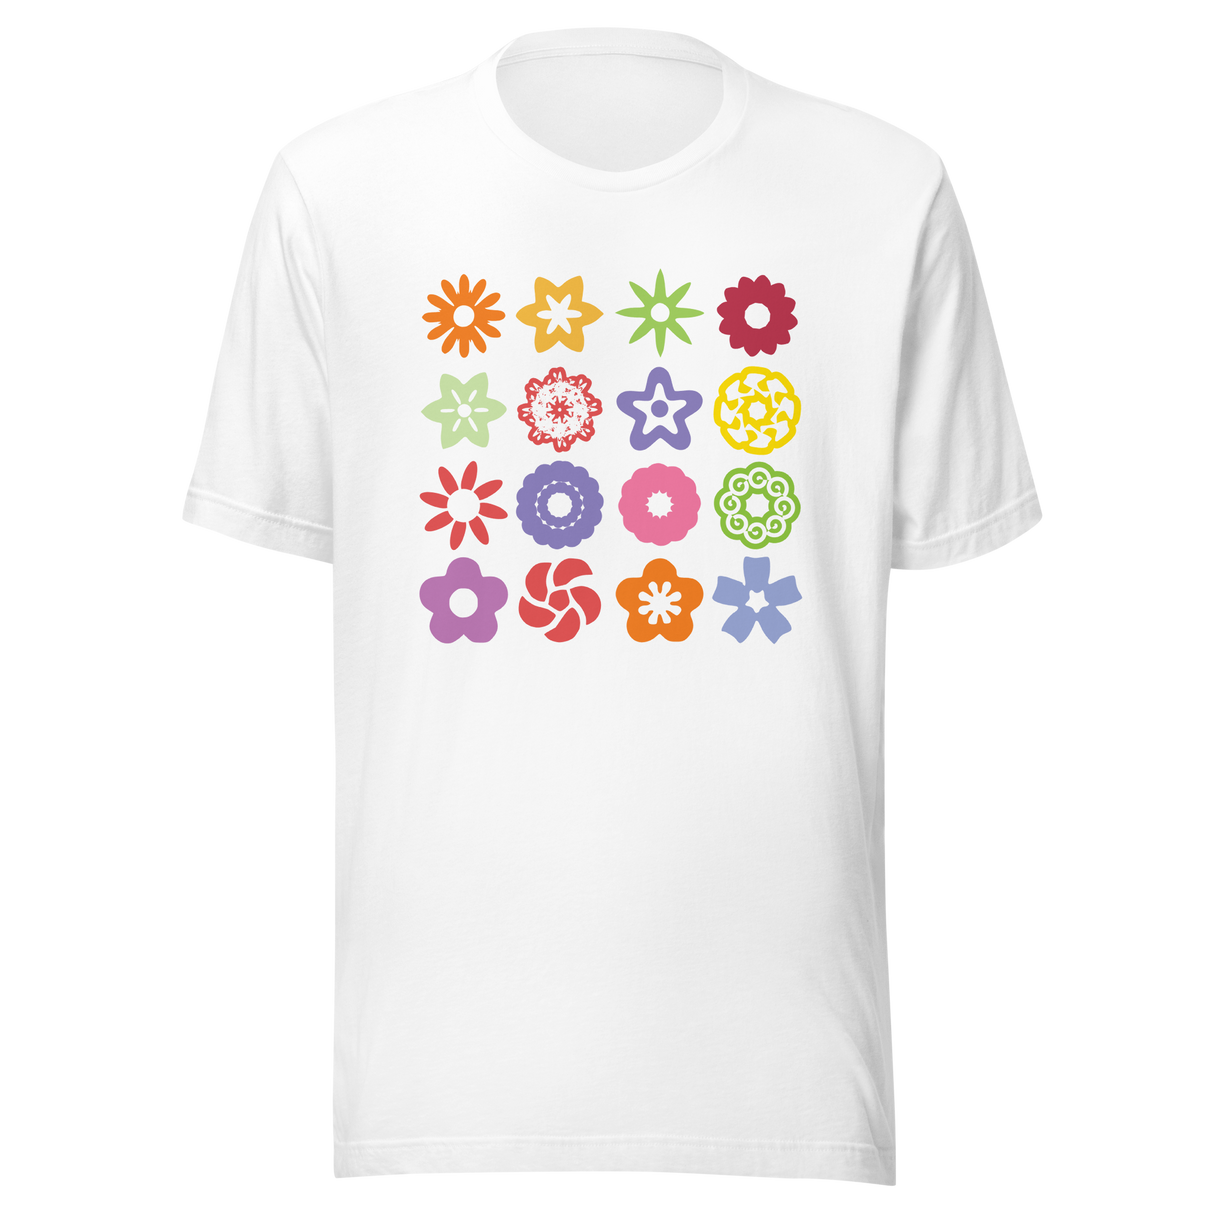 multi-color-shapes-4x4-shape-tee-abstract-t-shirt-colorful-tee-simple-t-shirt-gift-tee#color_white